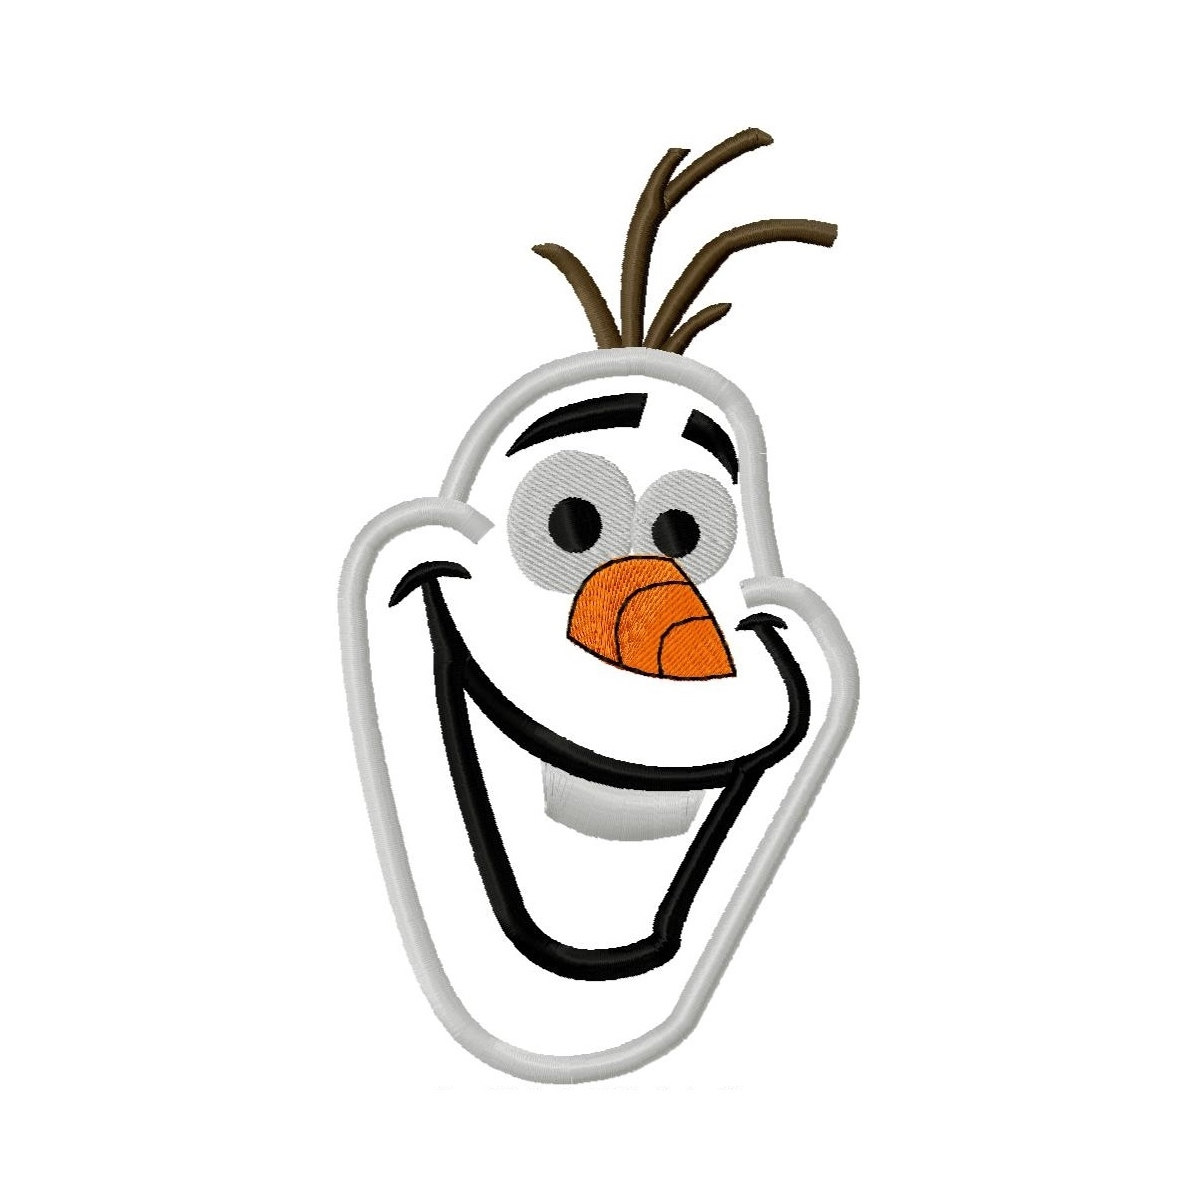 7 Best Images of Free Printable Olaf Face Olaf Face Printable, Olaf